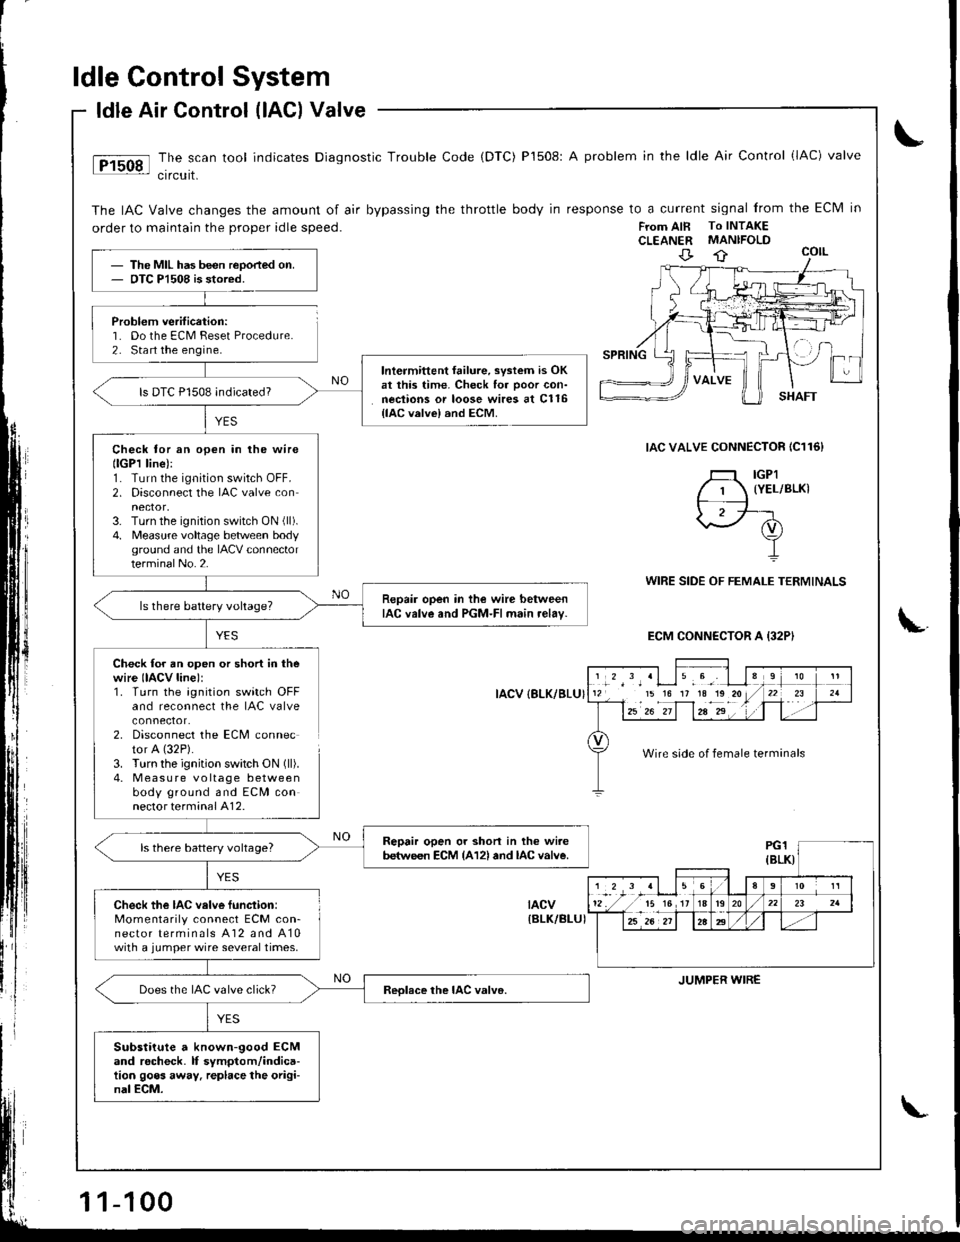 HONDA INTEGRA 1998 4.G User Guide ldle Control System
Problem verification:1. Do the ECM Feset Procedure.2. Sta rt the engine.
ldle Air Control (lAG) Valve
The scan tool indicates Diagnostic Trouble Code (DTC) P1508: A problem in the